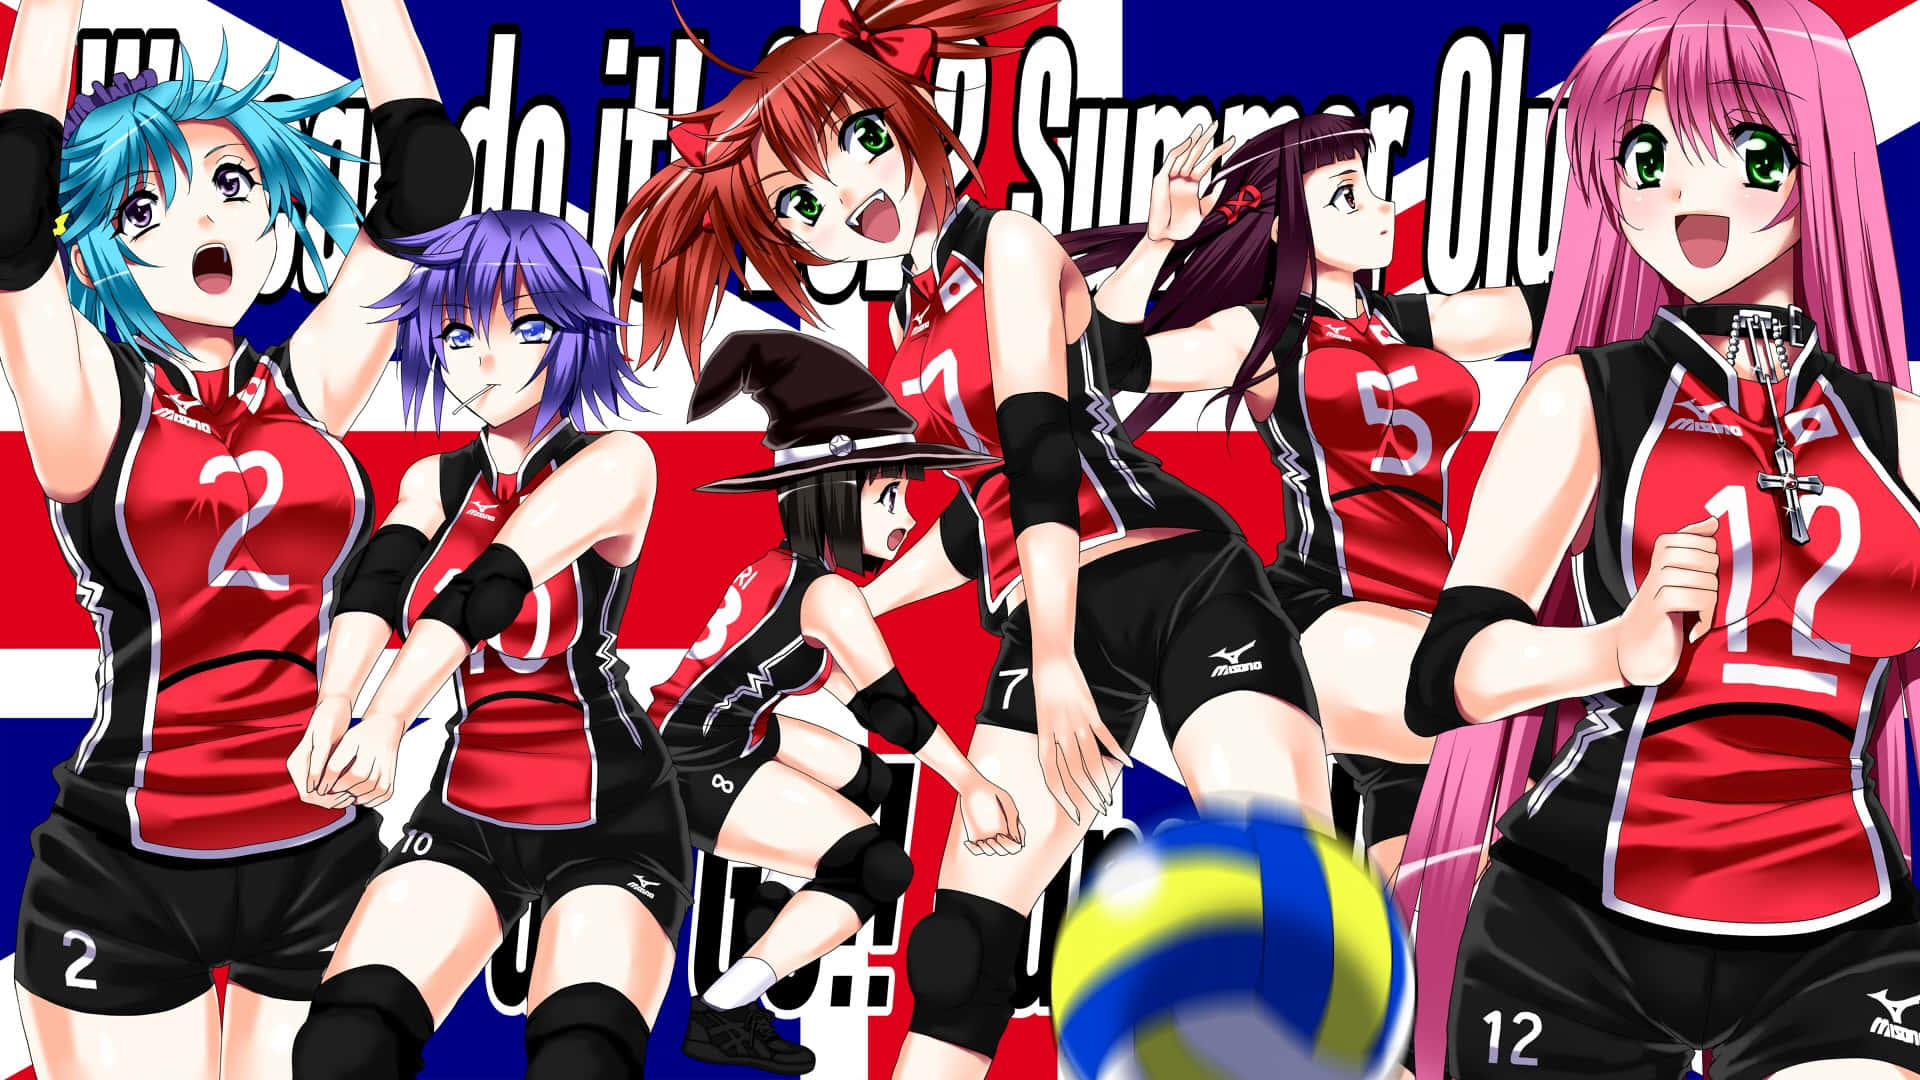 A Group Of Girls In A Volleyball Uniform With A British Flag Wallpaper